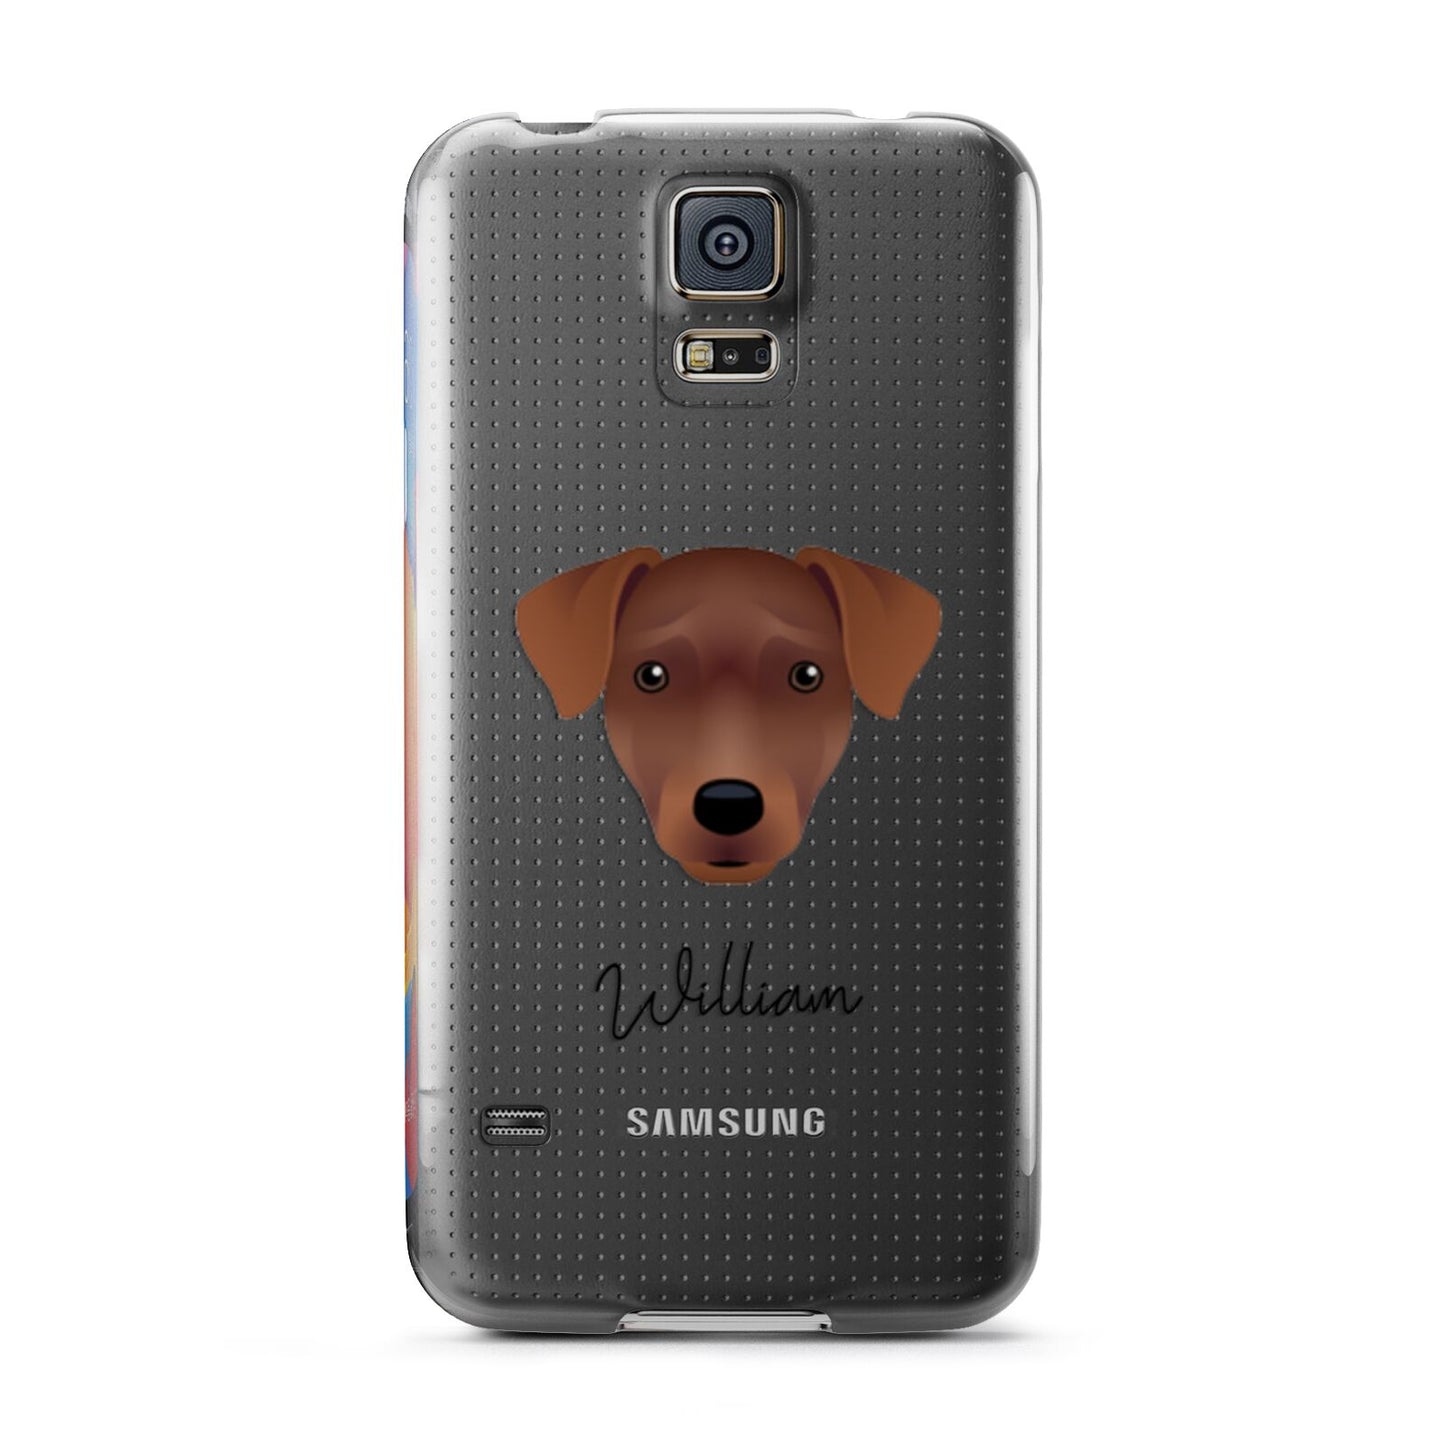 Patterdale Terrier Personalised Samsung Galaxy S5 Case